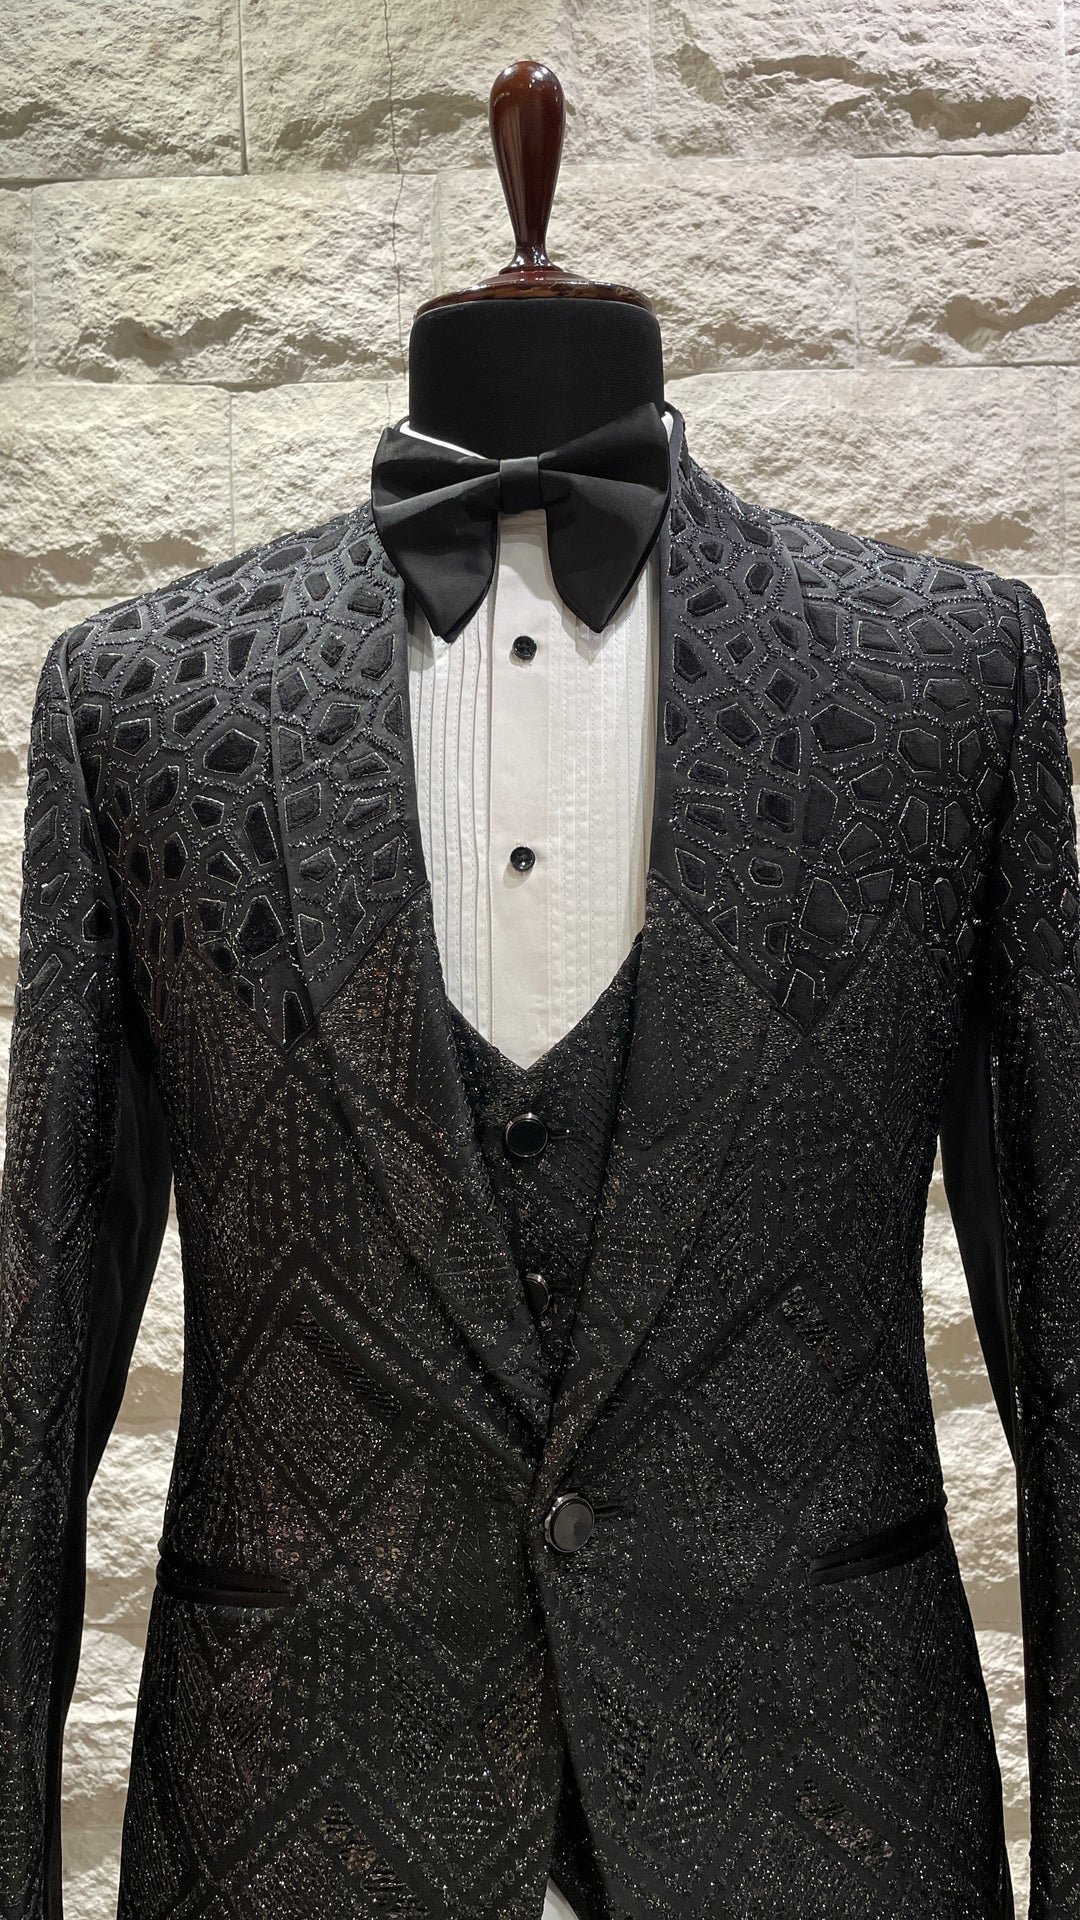 Black Tuxedo with silver details